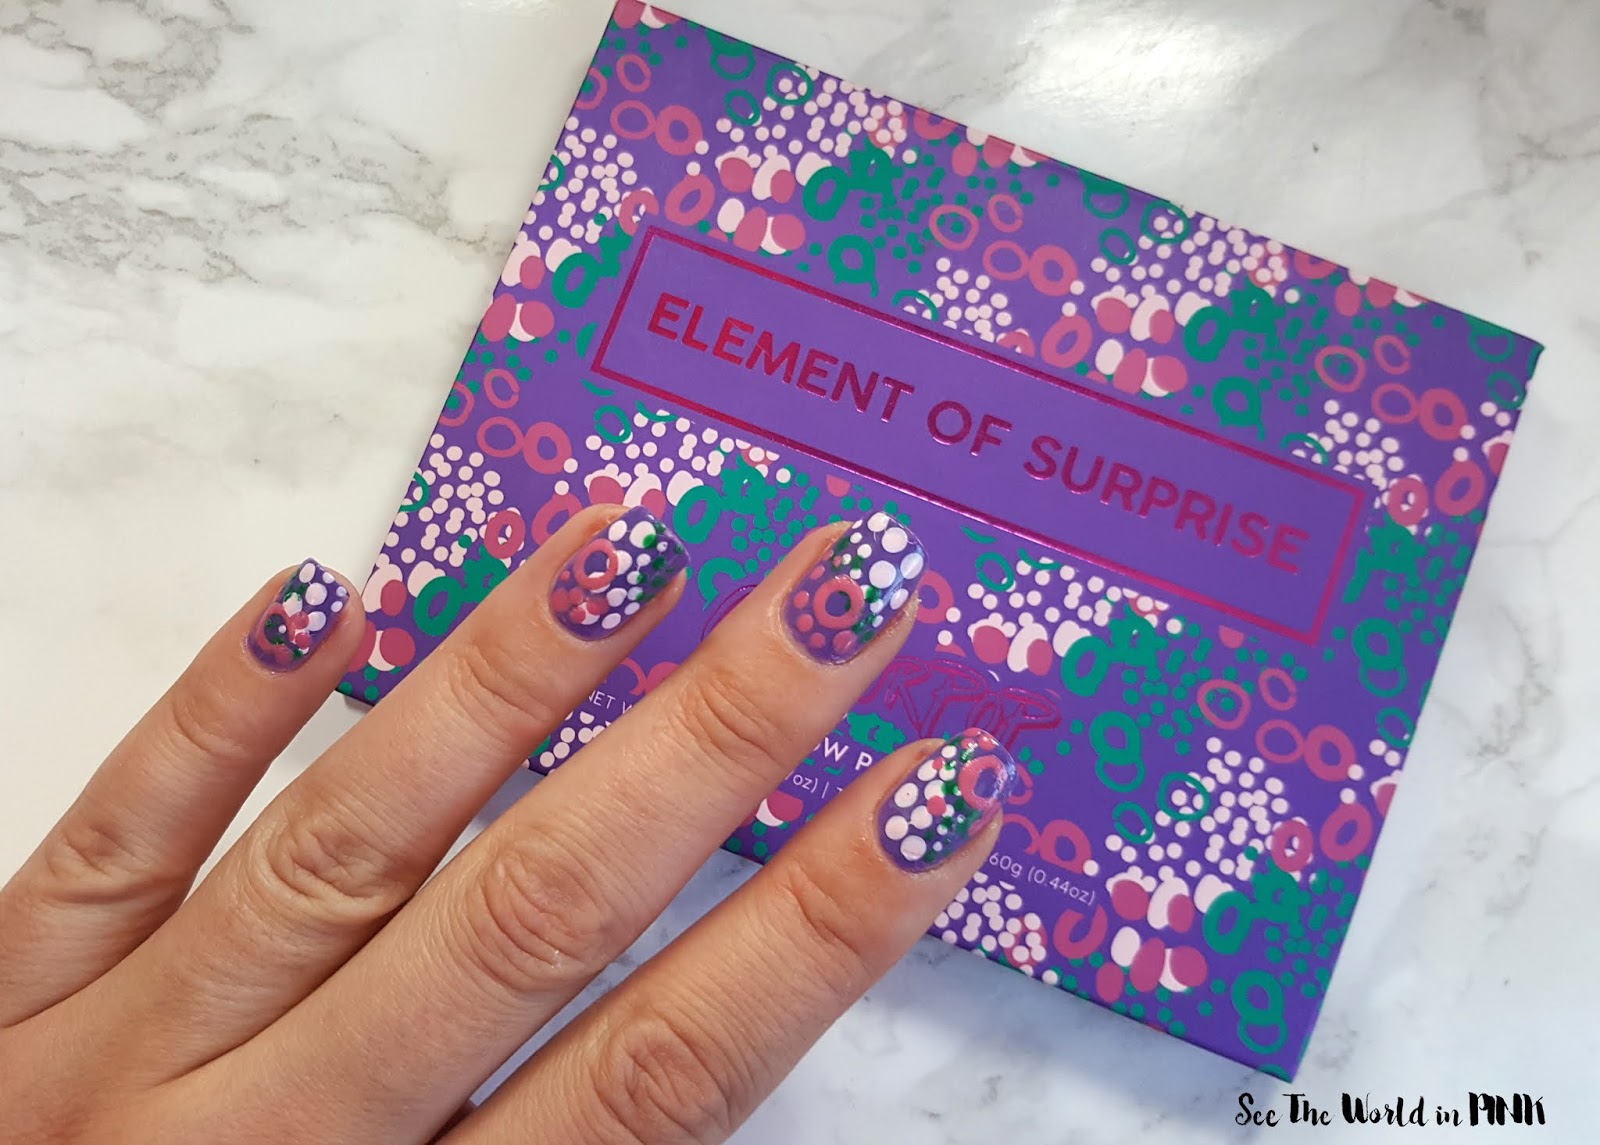 Manicure Monday "Inspired By Packaging" - ColourPop Element Of Surprise Palette Nails, Swatches, Review and Eye Shadow Look!